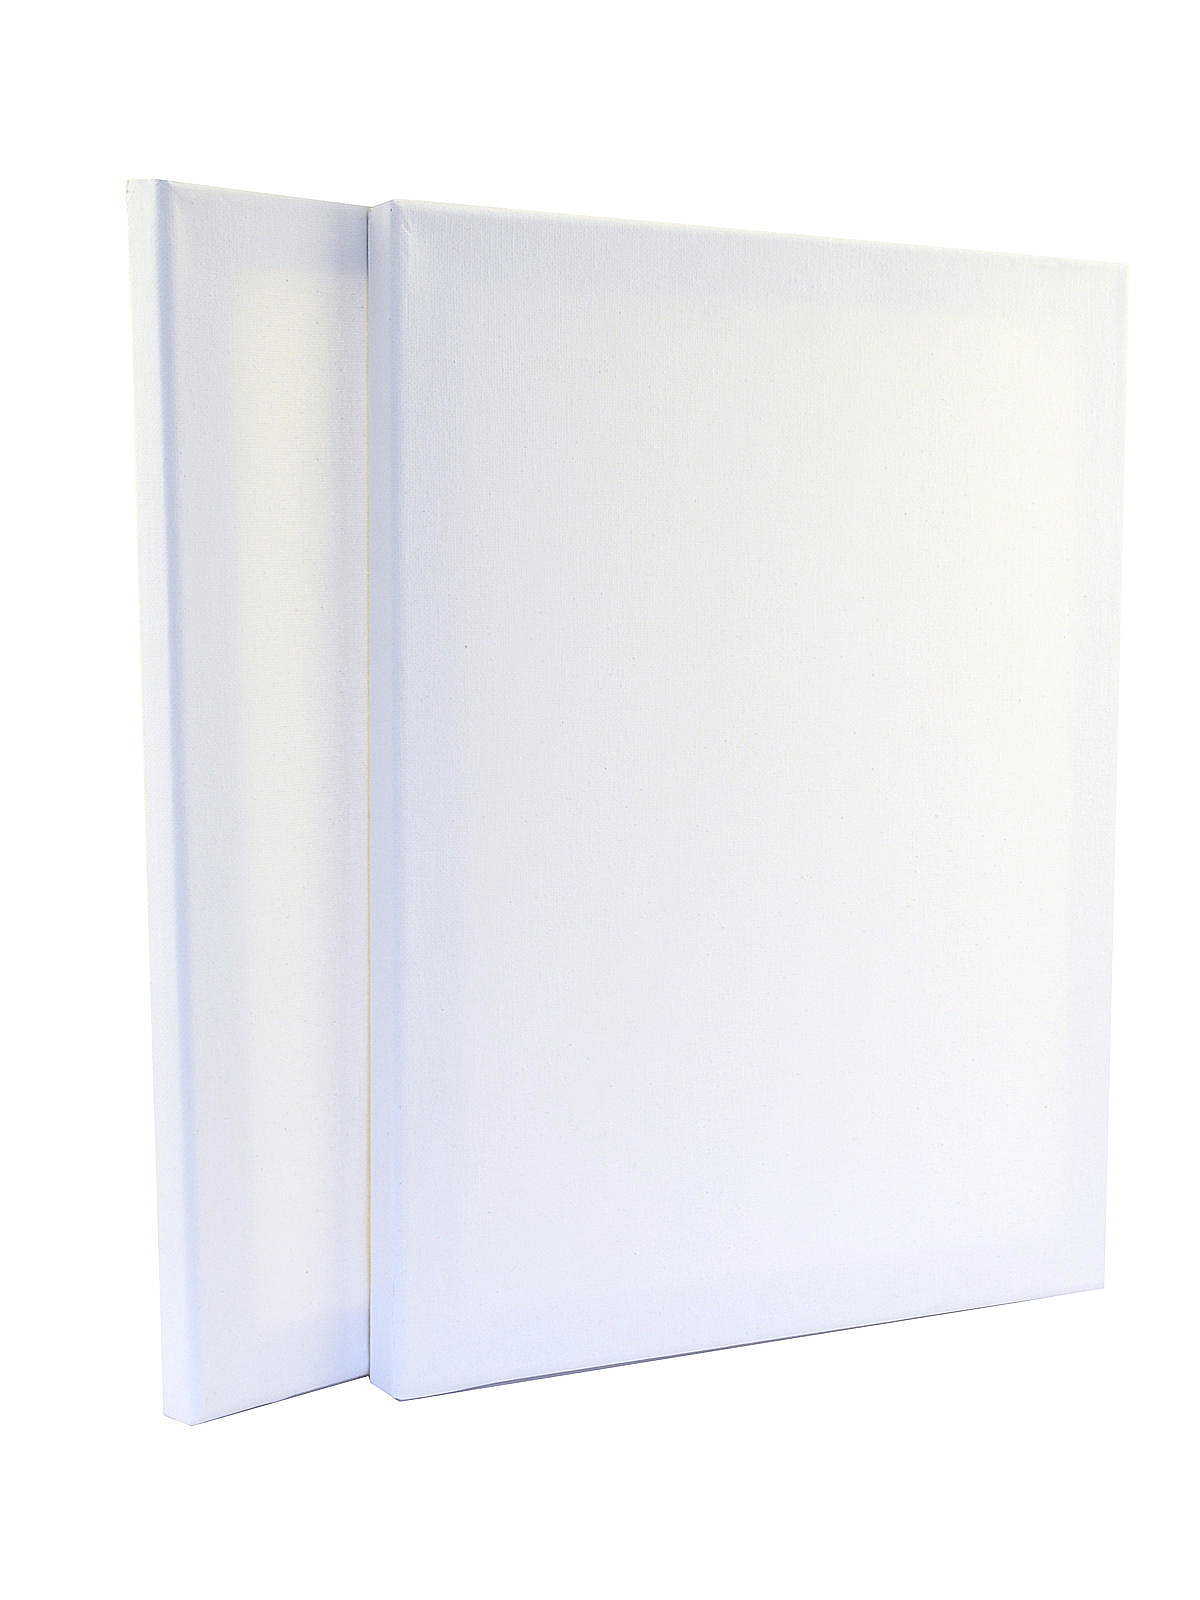 Daler-Rowney 12 x 16 Simply Art Canvas Panel Pack - 3 ct